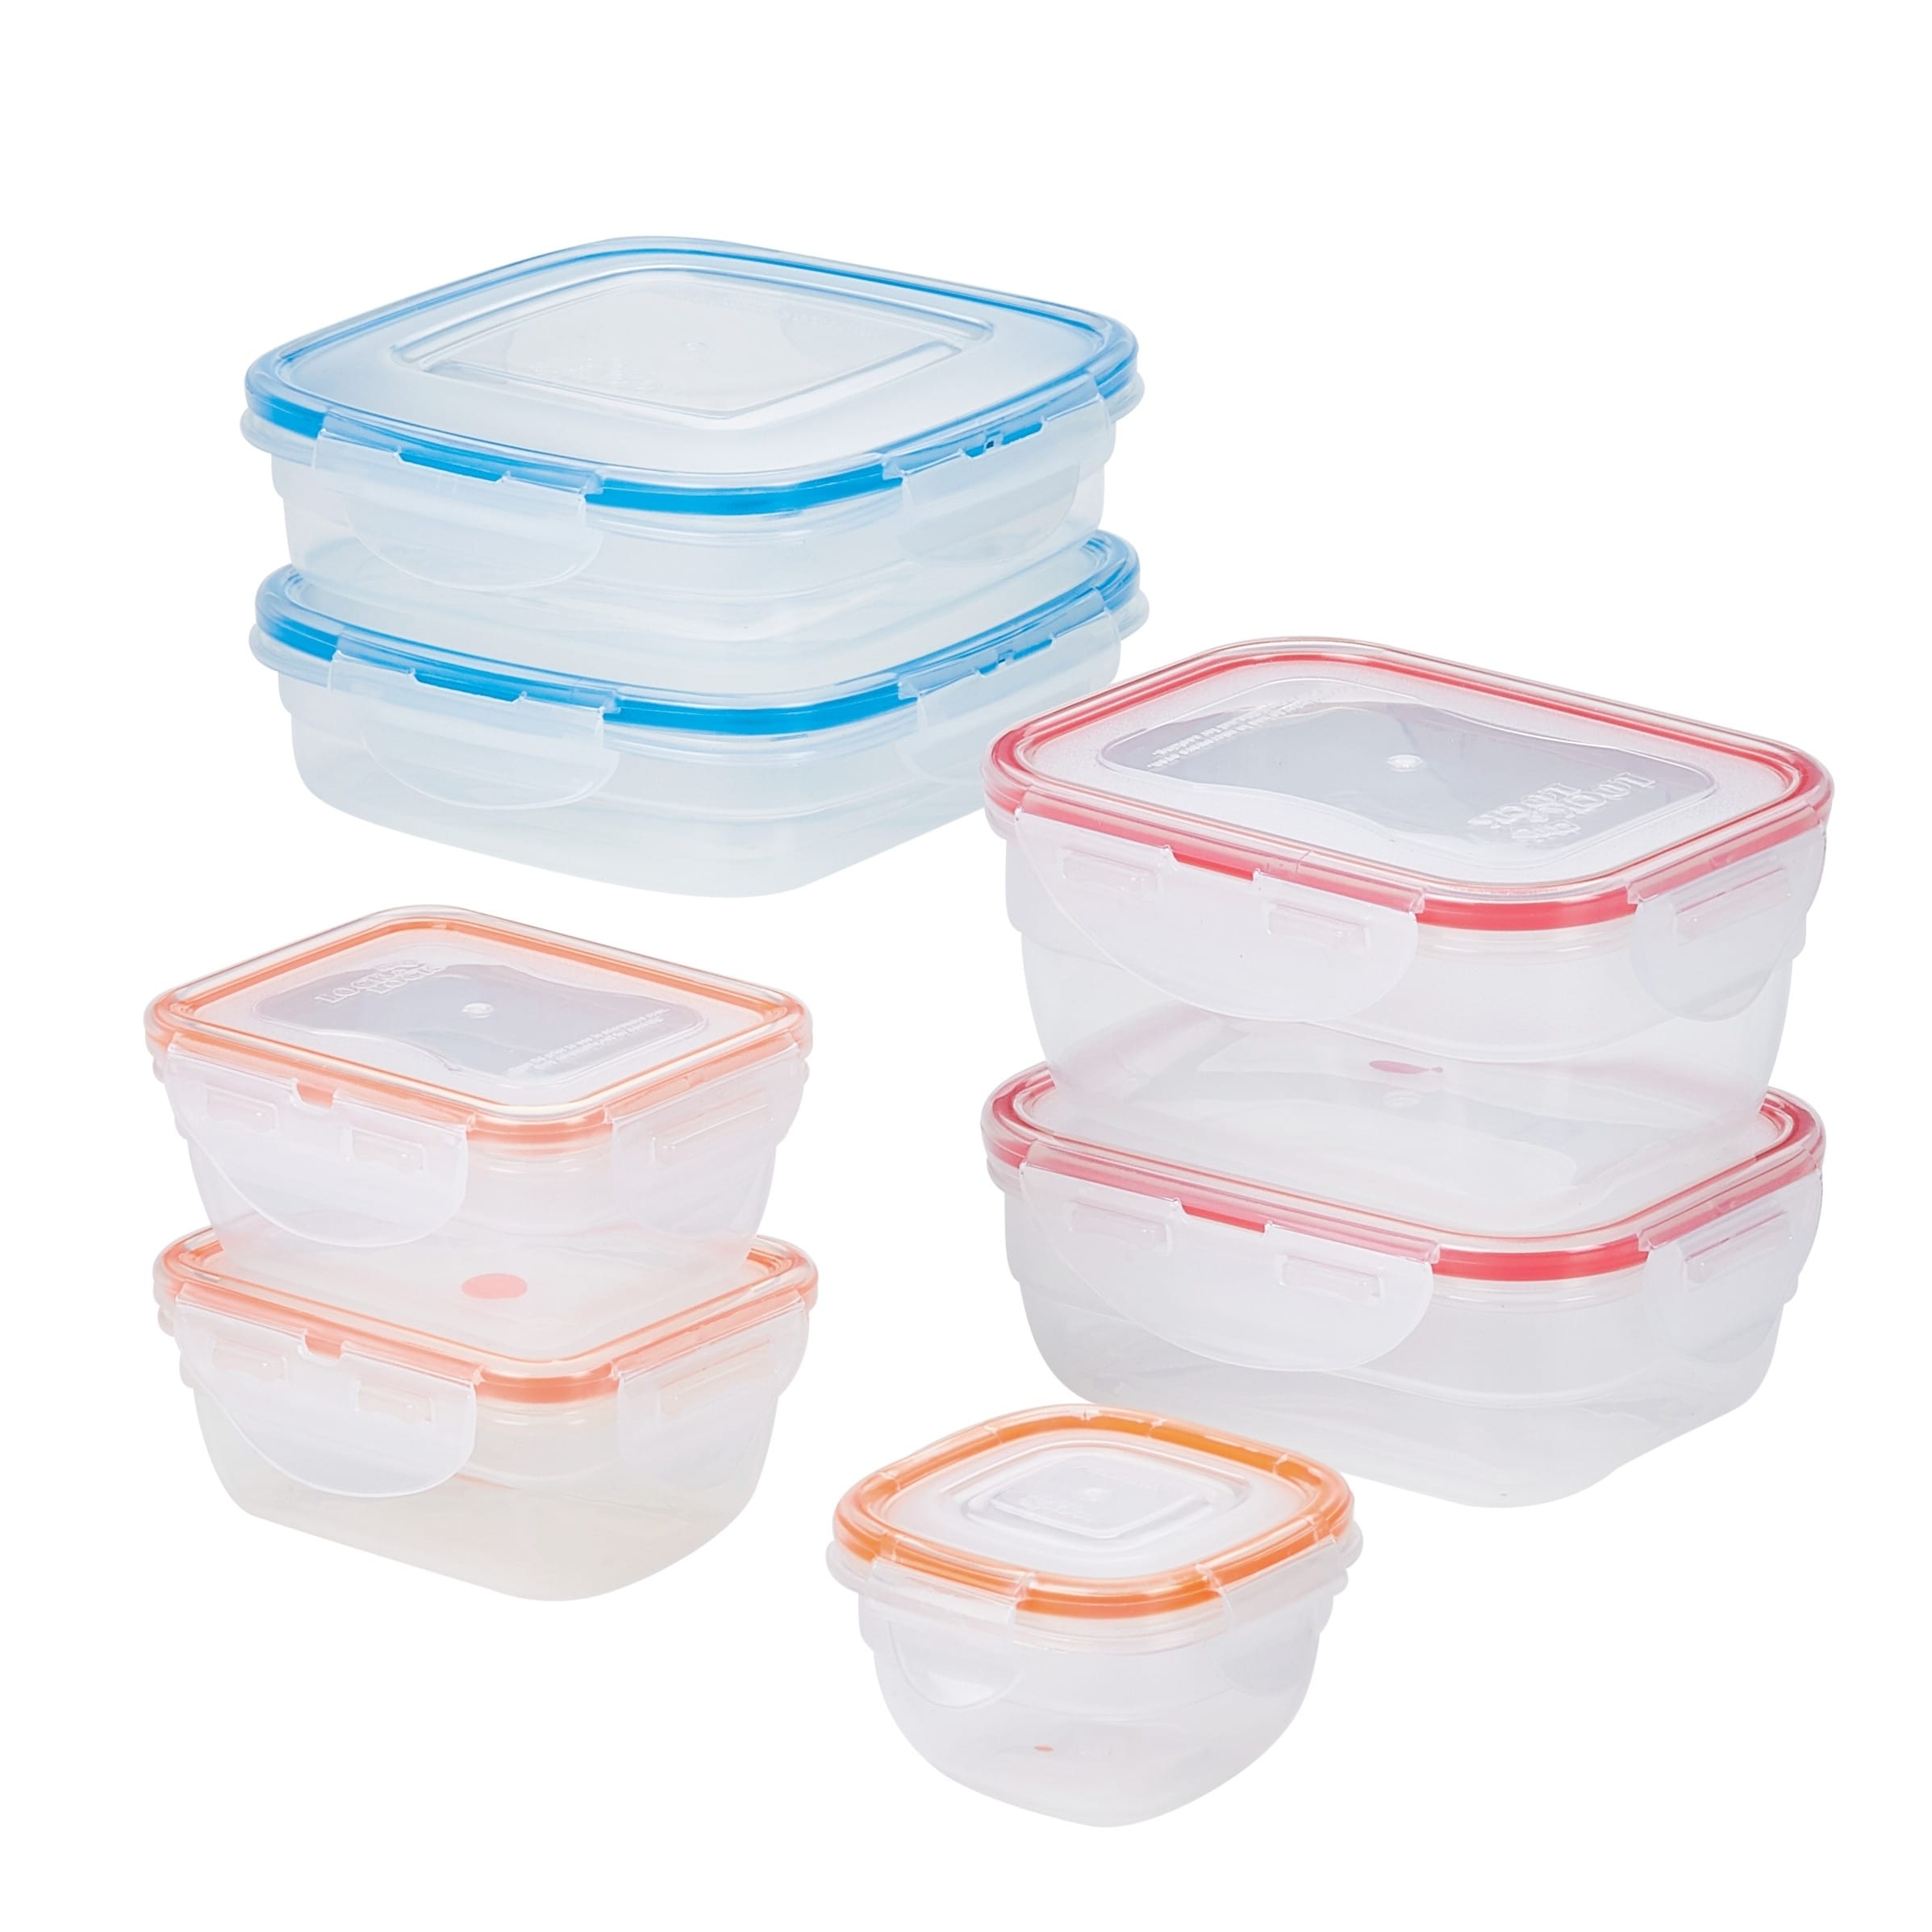 Easy Essentials Divided Food Storage Containers 54oz 2 PC Set - Clear - 2 Piece